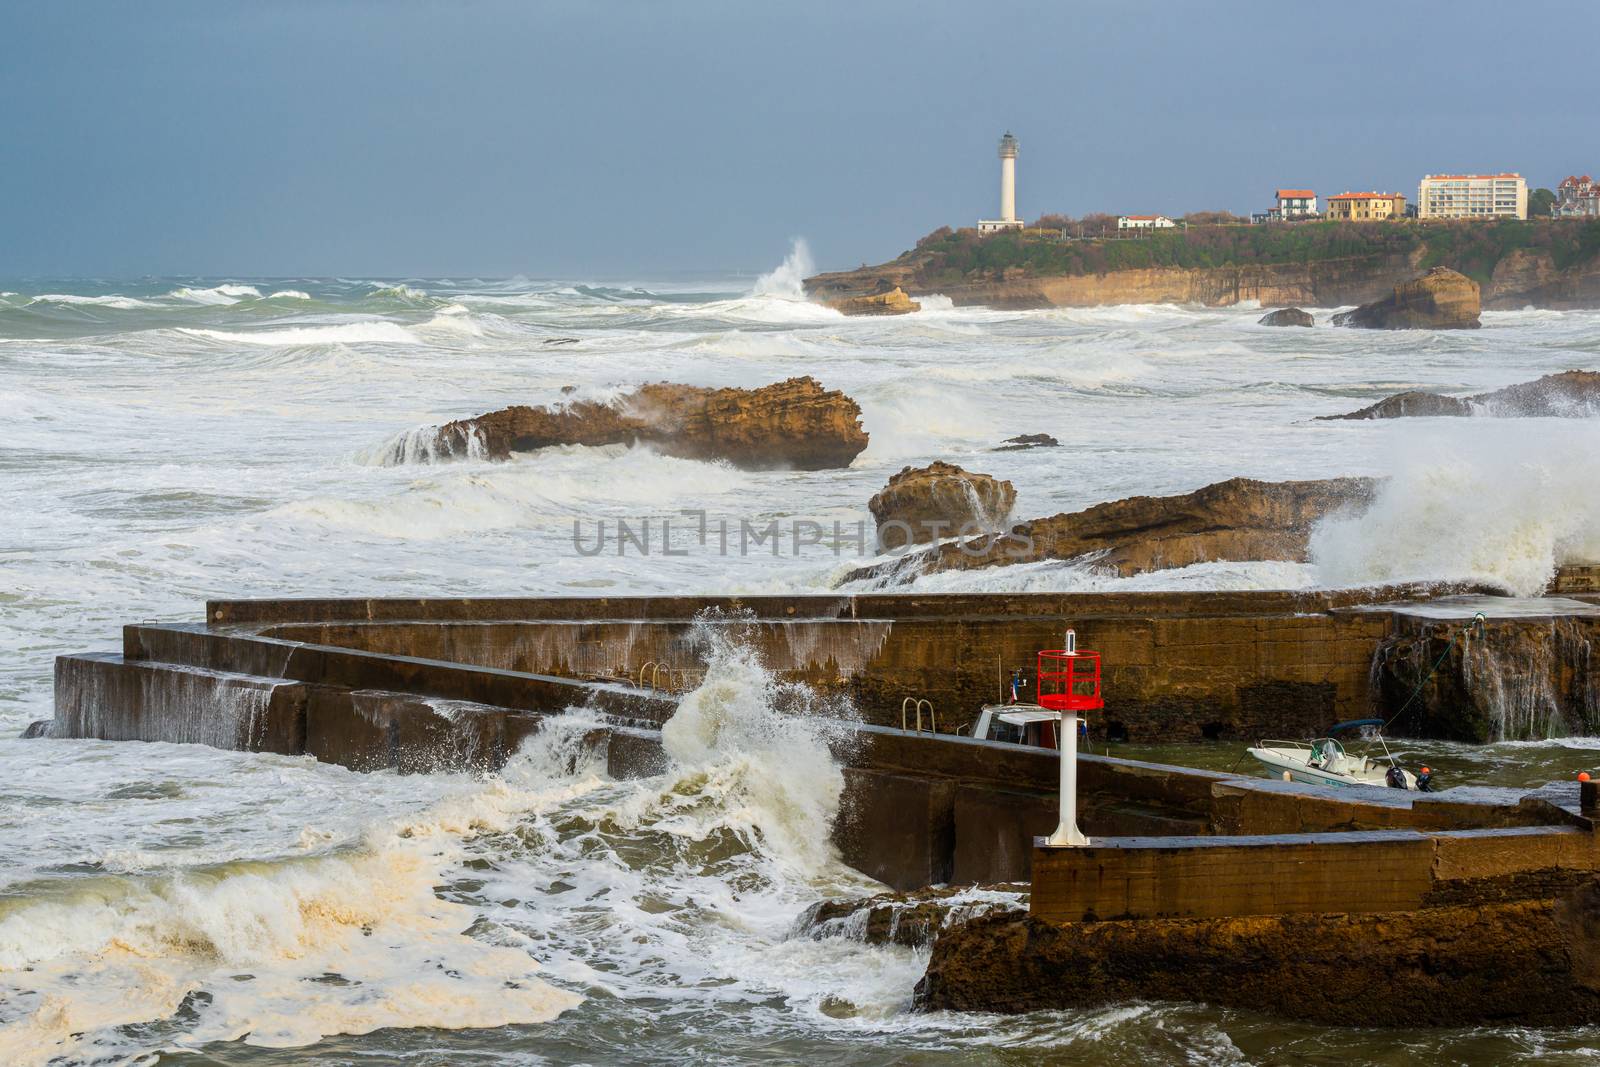 Stormy weather in Biarritz on the Atlantic coast in southwest France